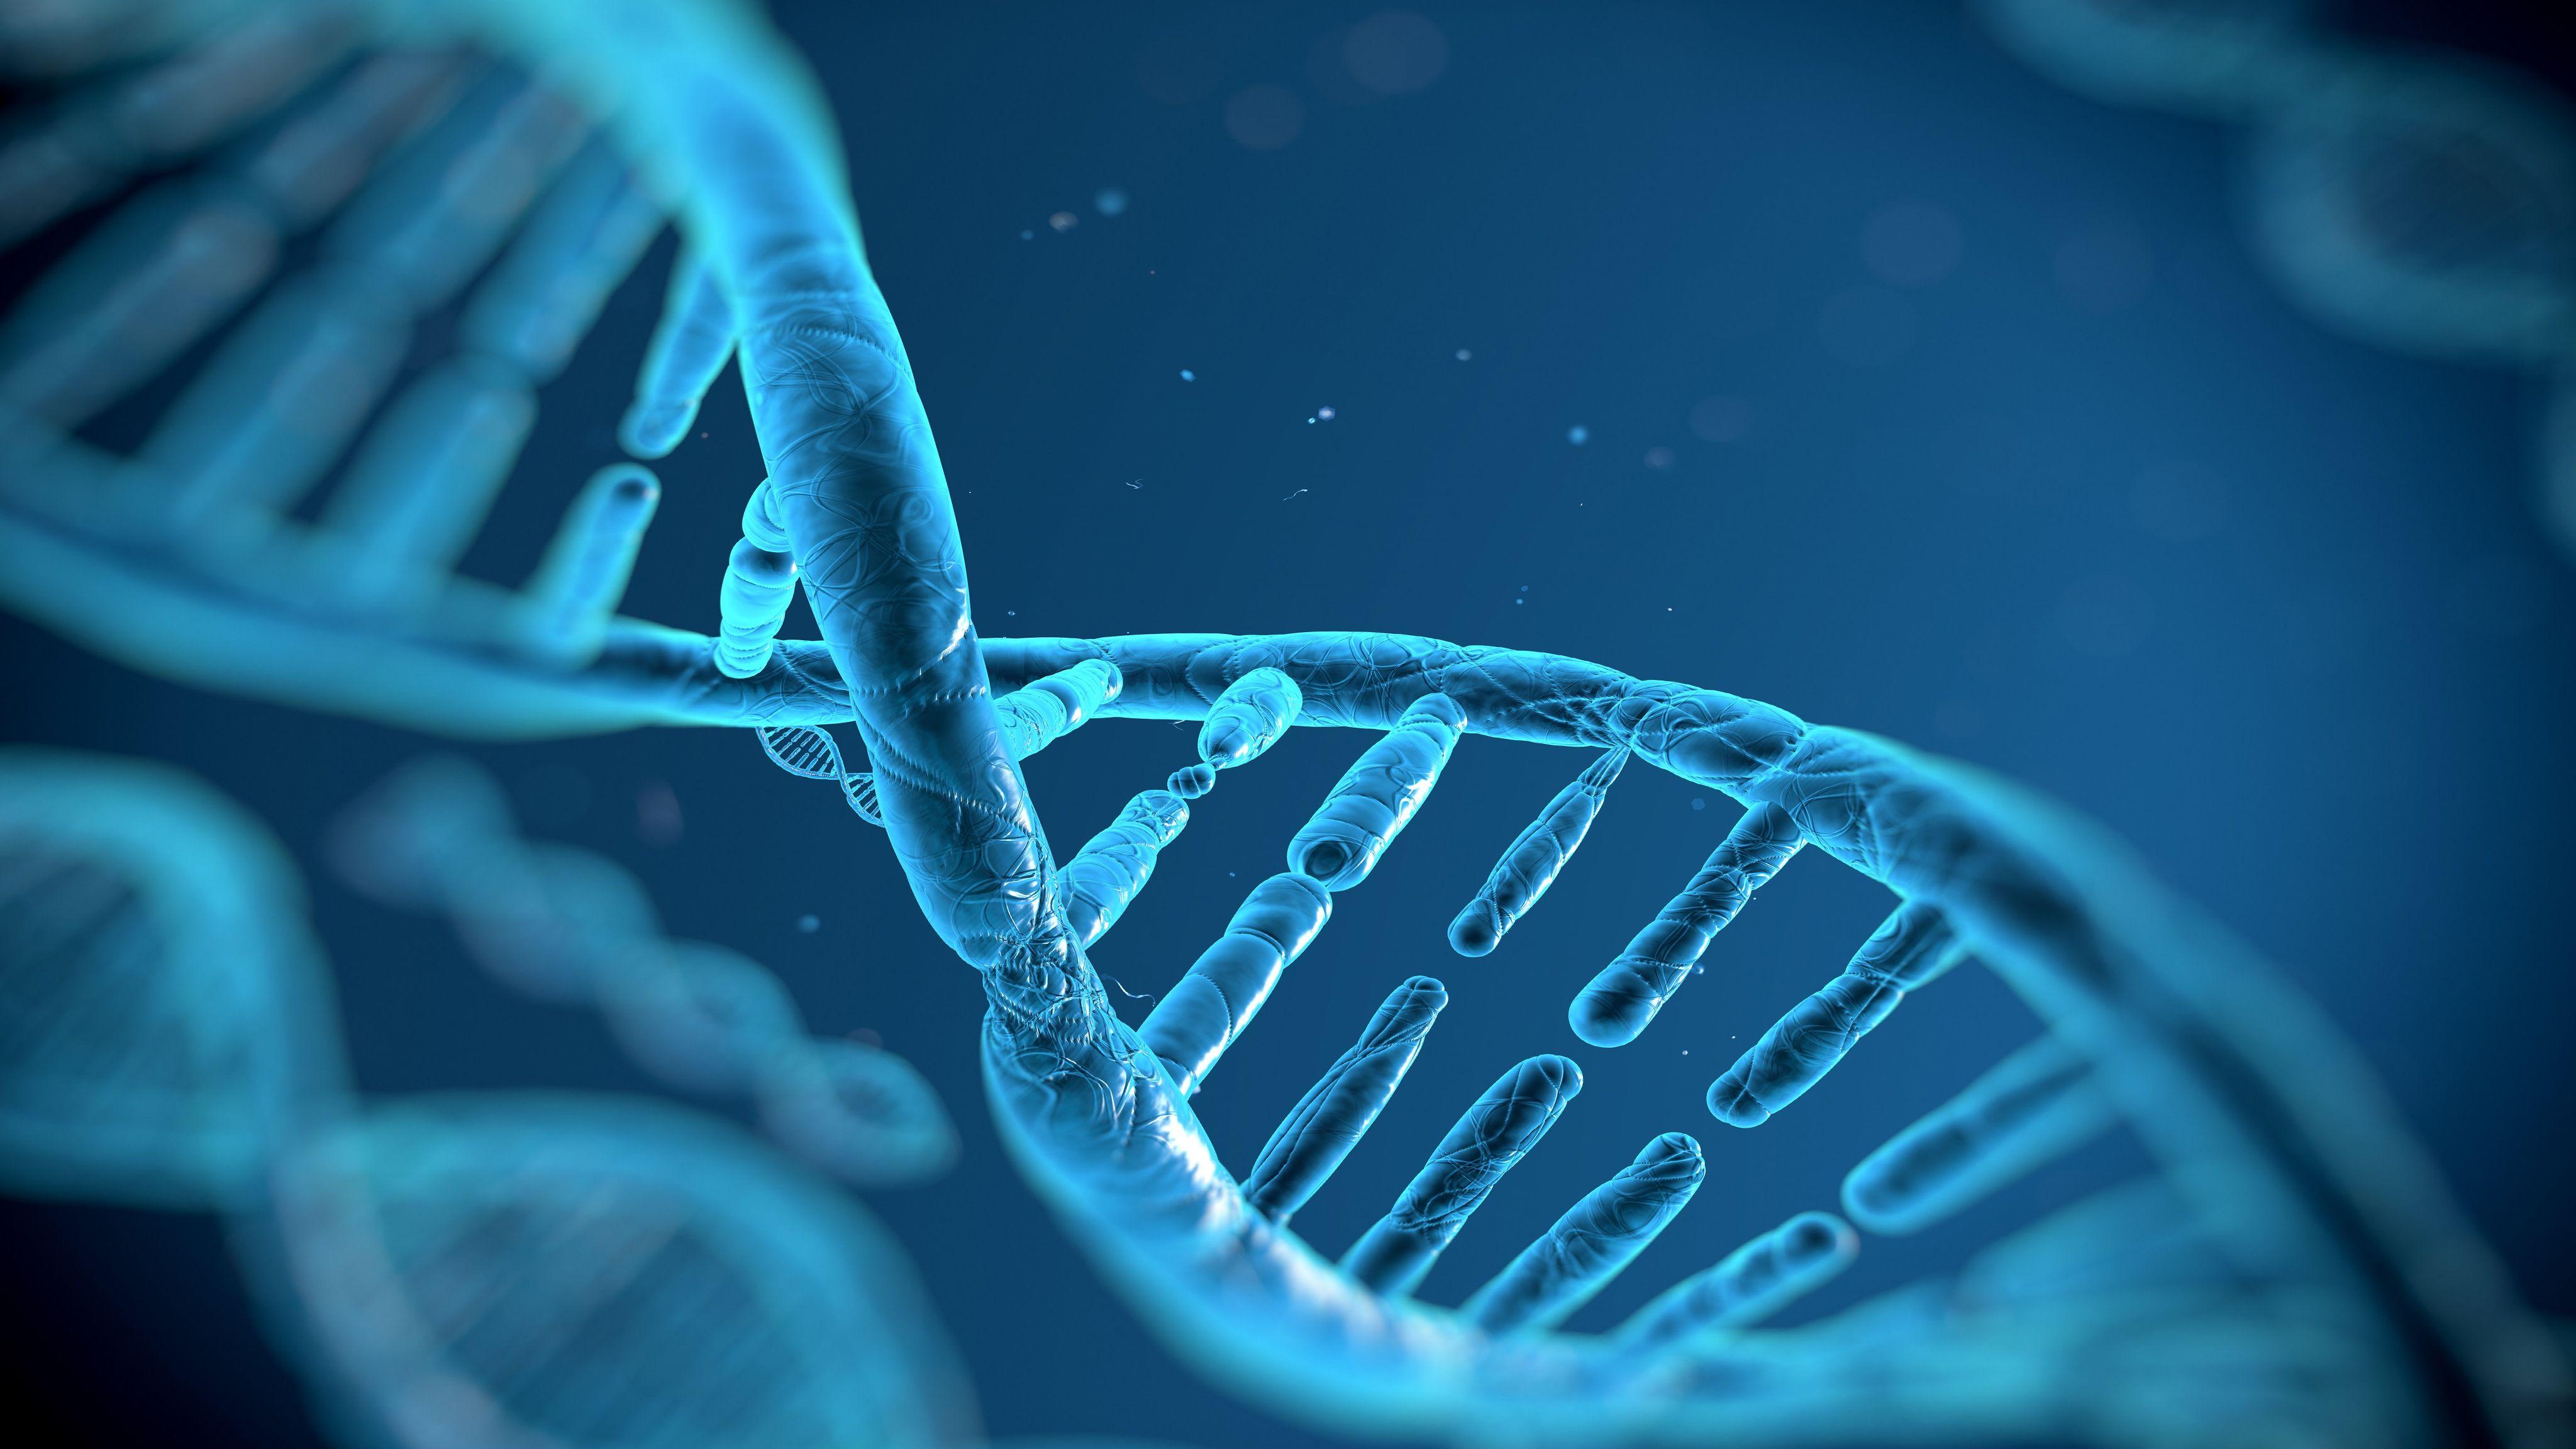 1,521 Dna Wallpaper Stock Video Footage - 4K and HD Video Clips |  Shutterstock